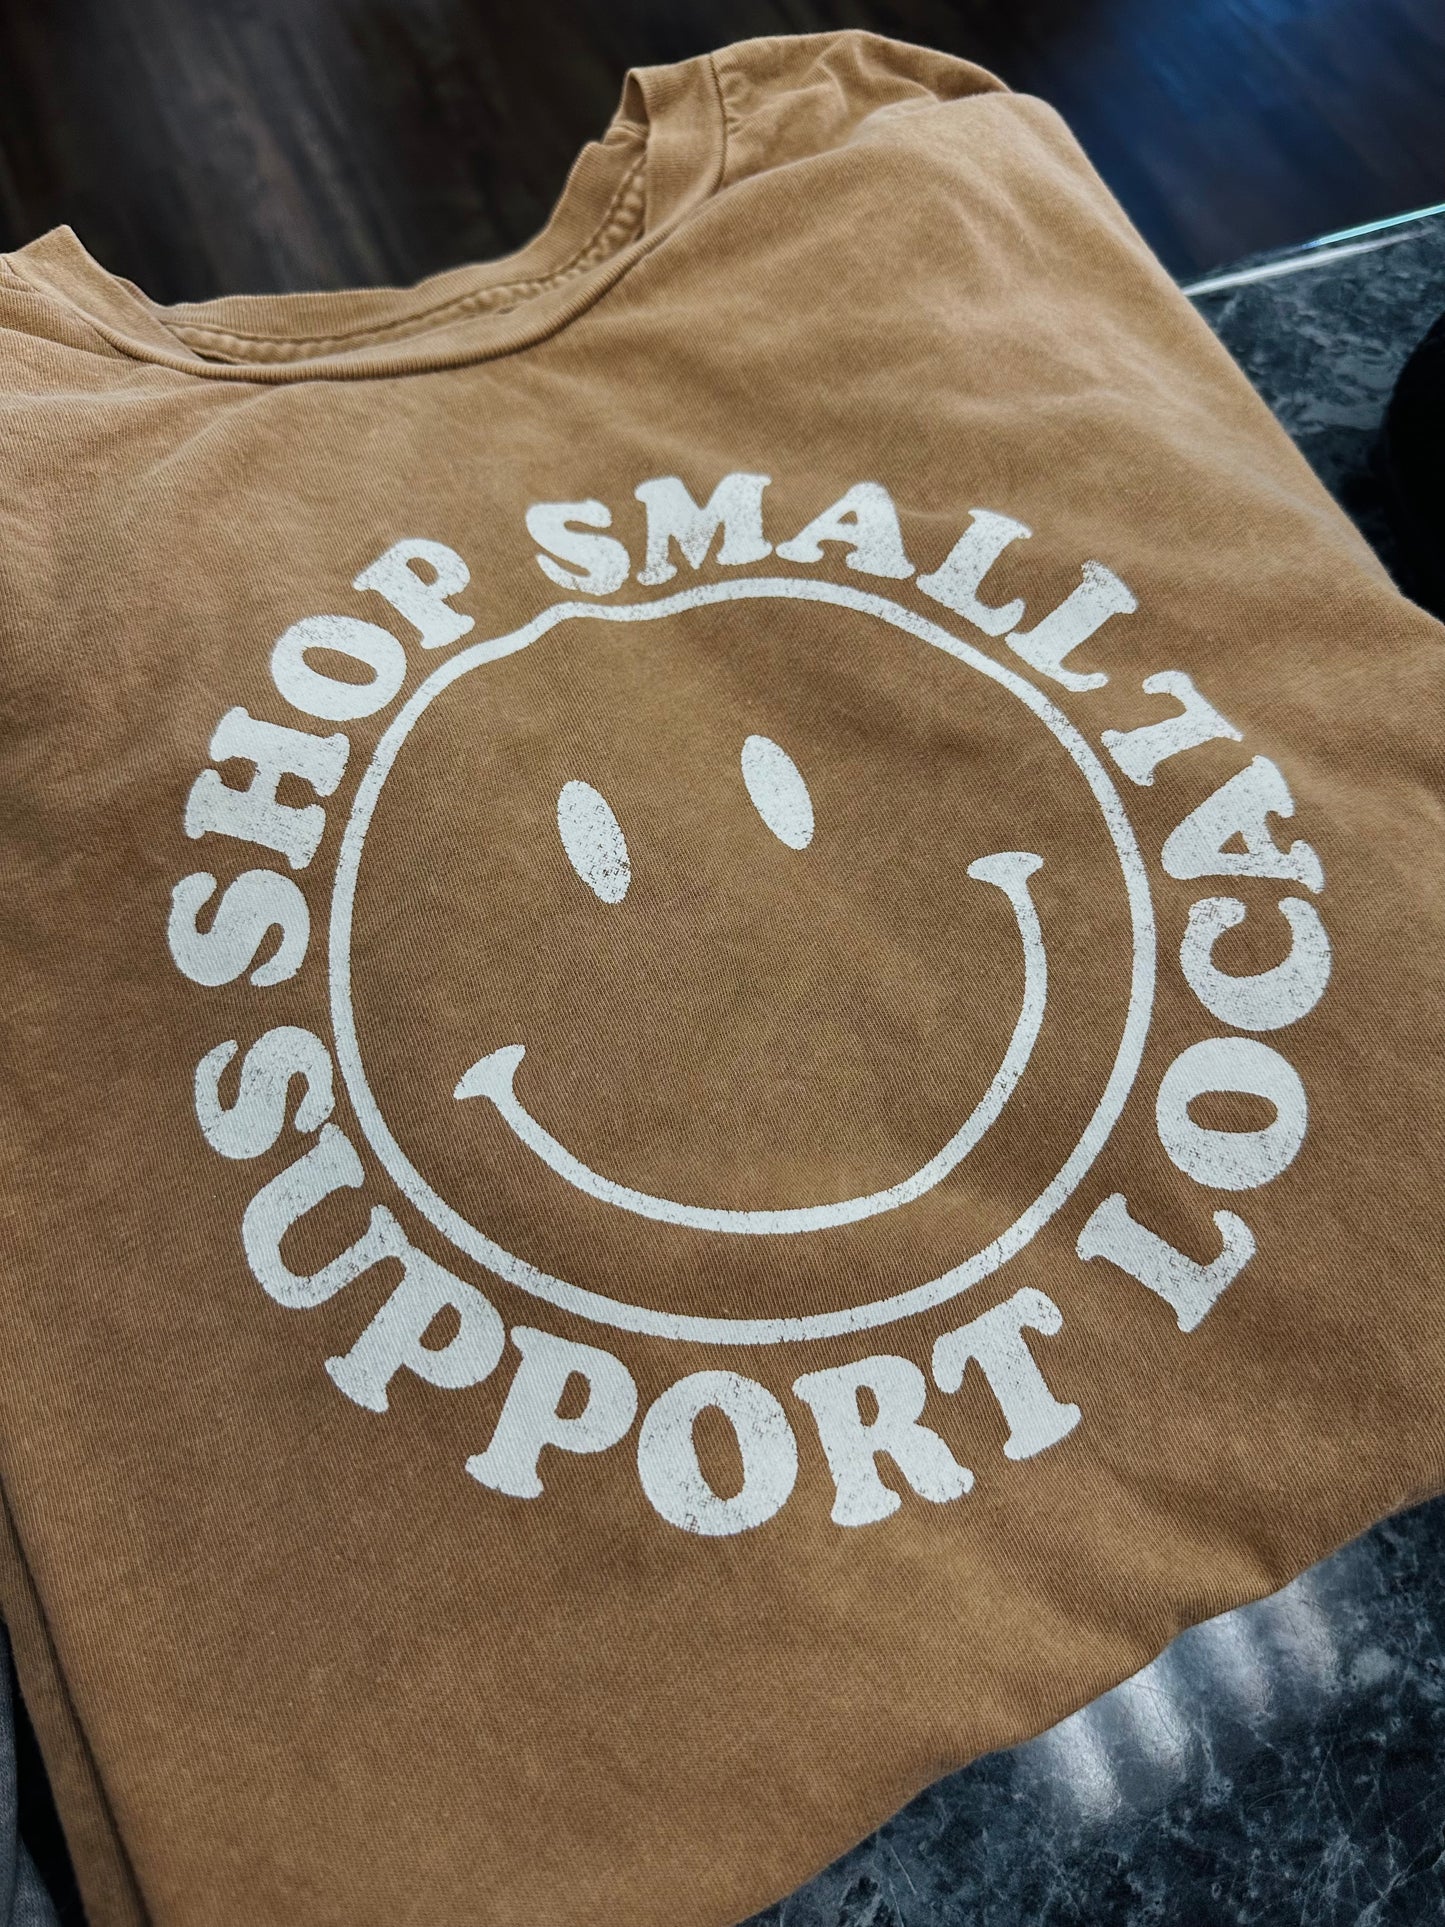 Shop Small, Support Local Graphic Tee (Toast)